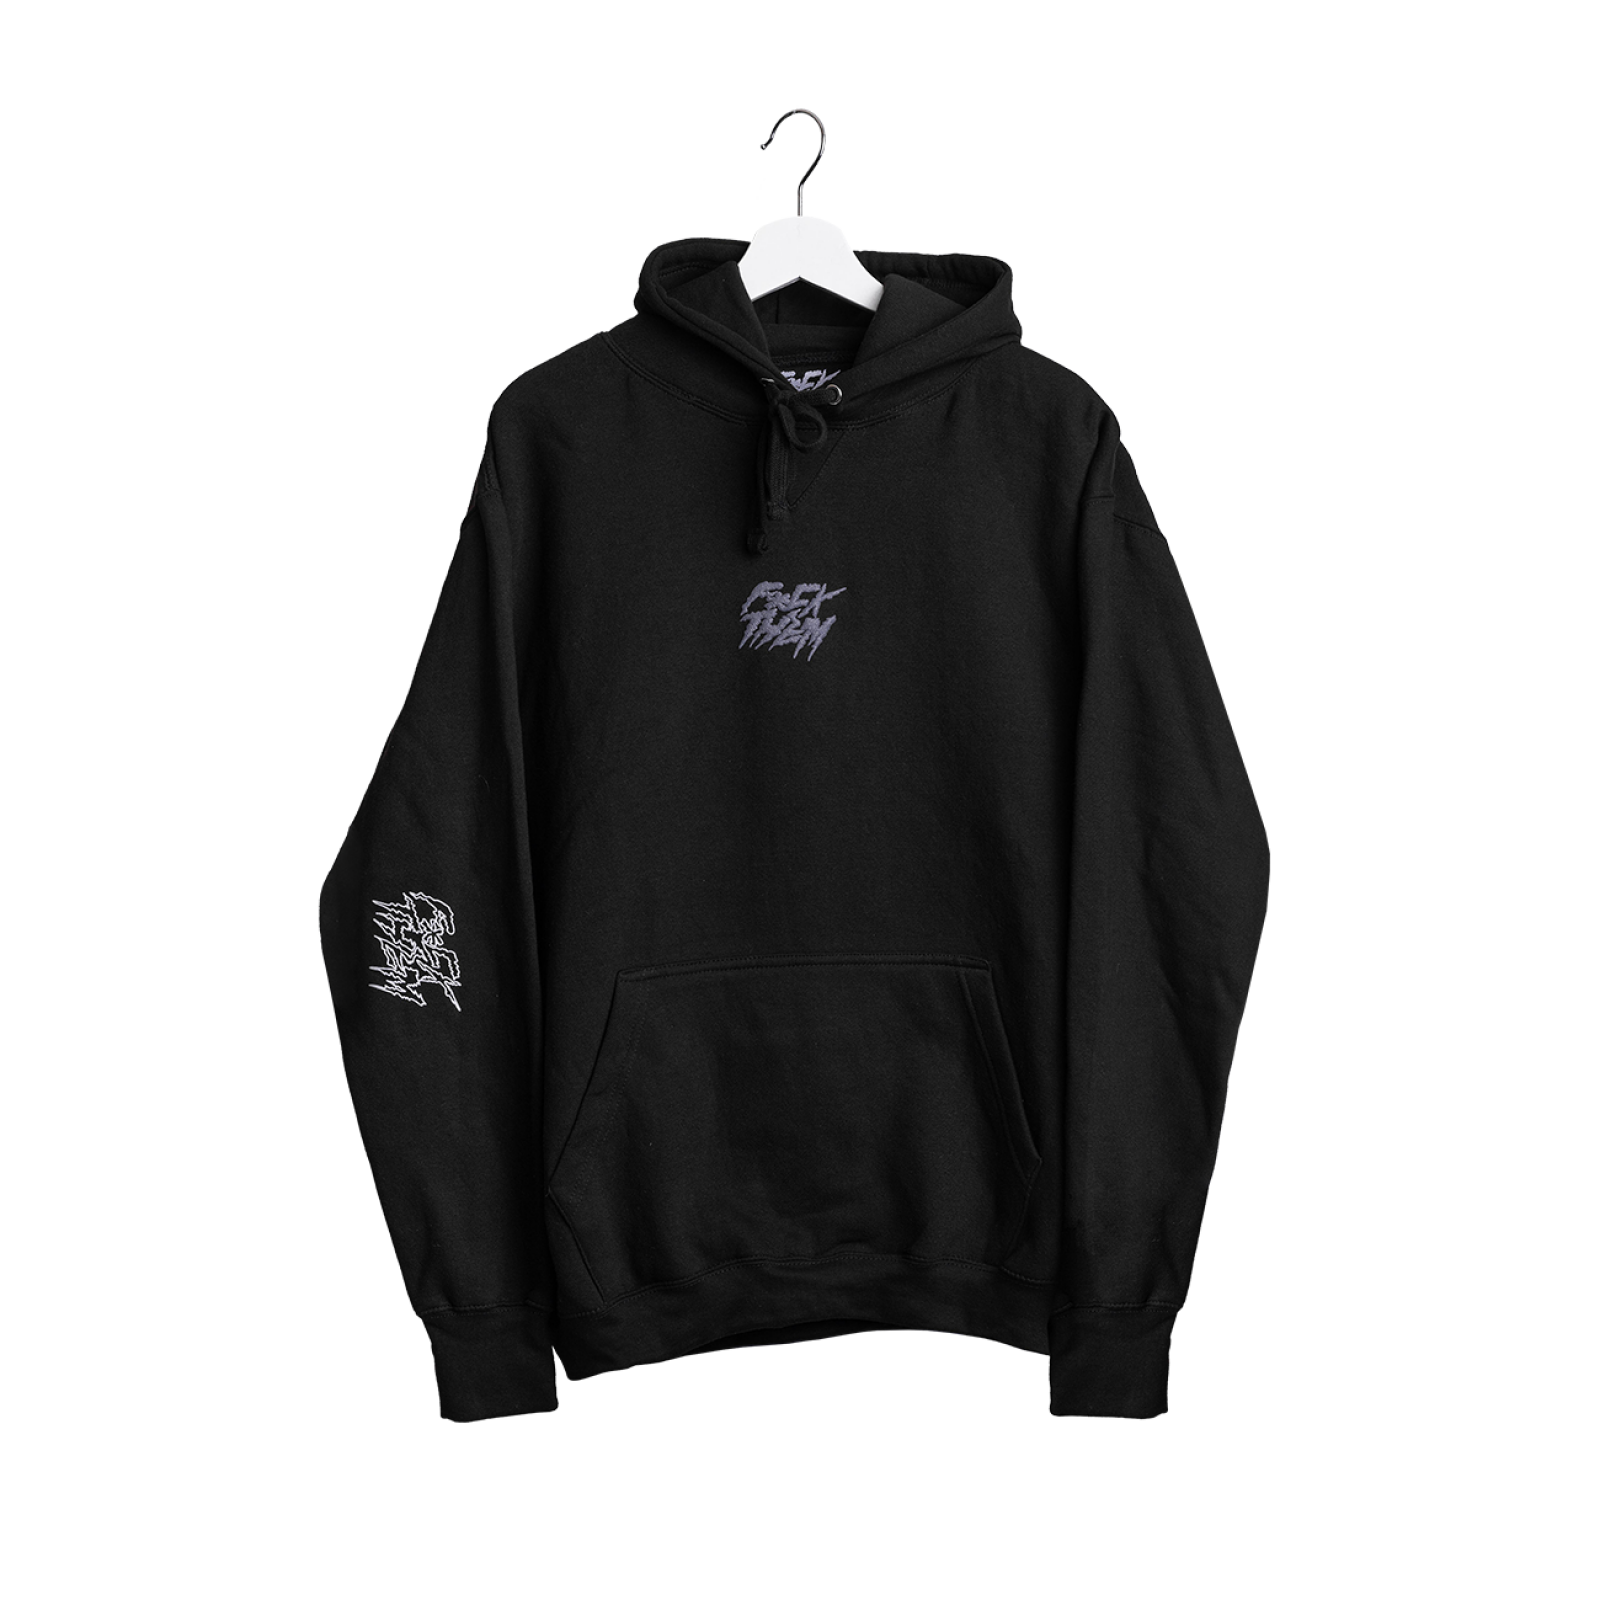 Relative size Heading chilly 2020 Winter | F*CKTHEM OFFICIAL STORE